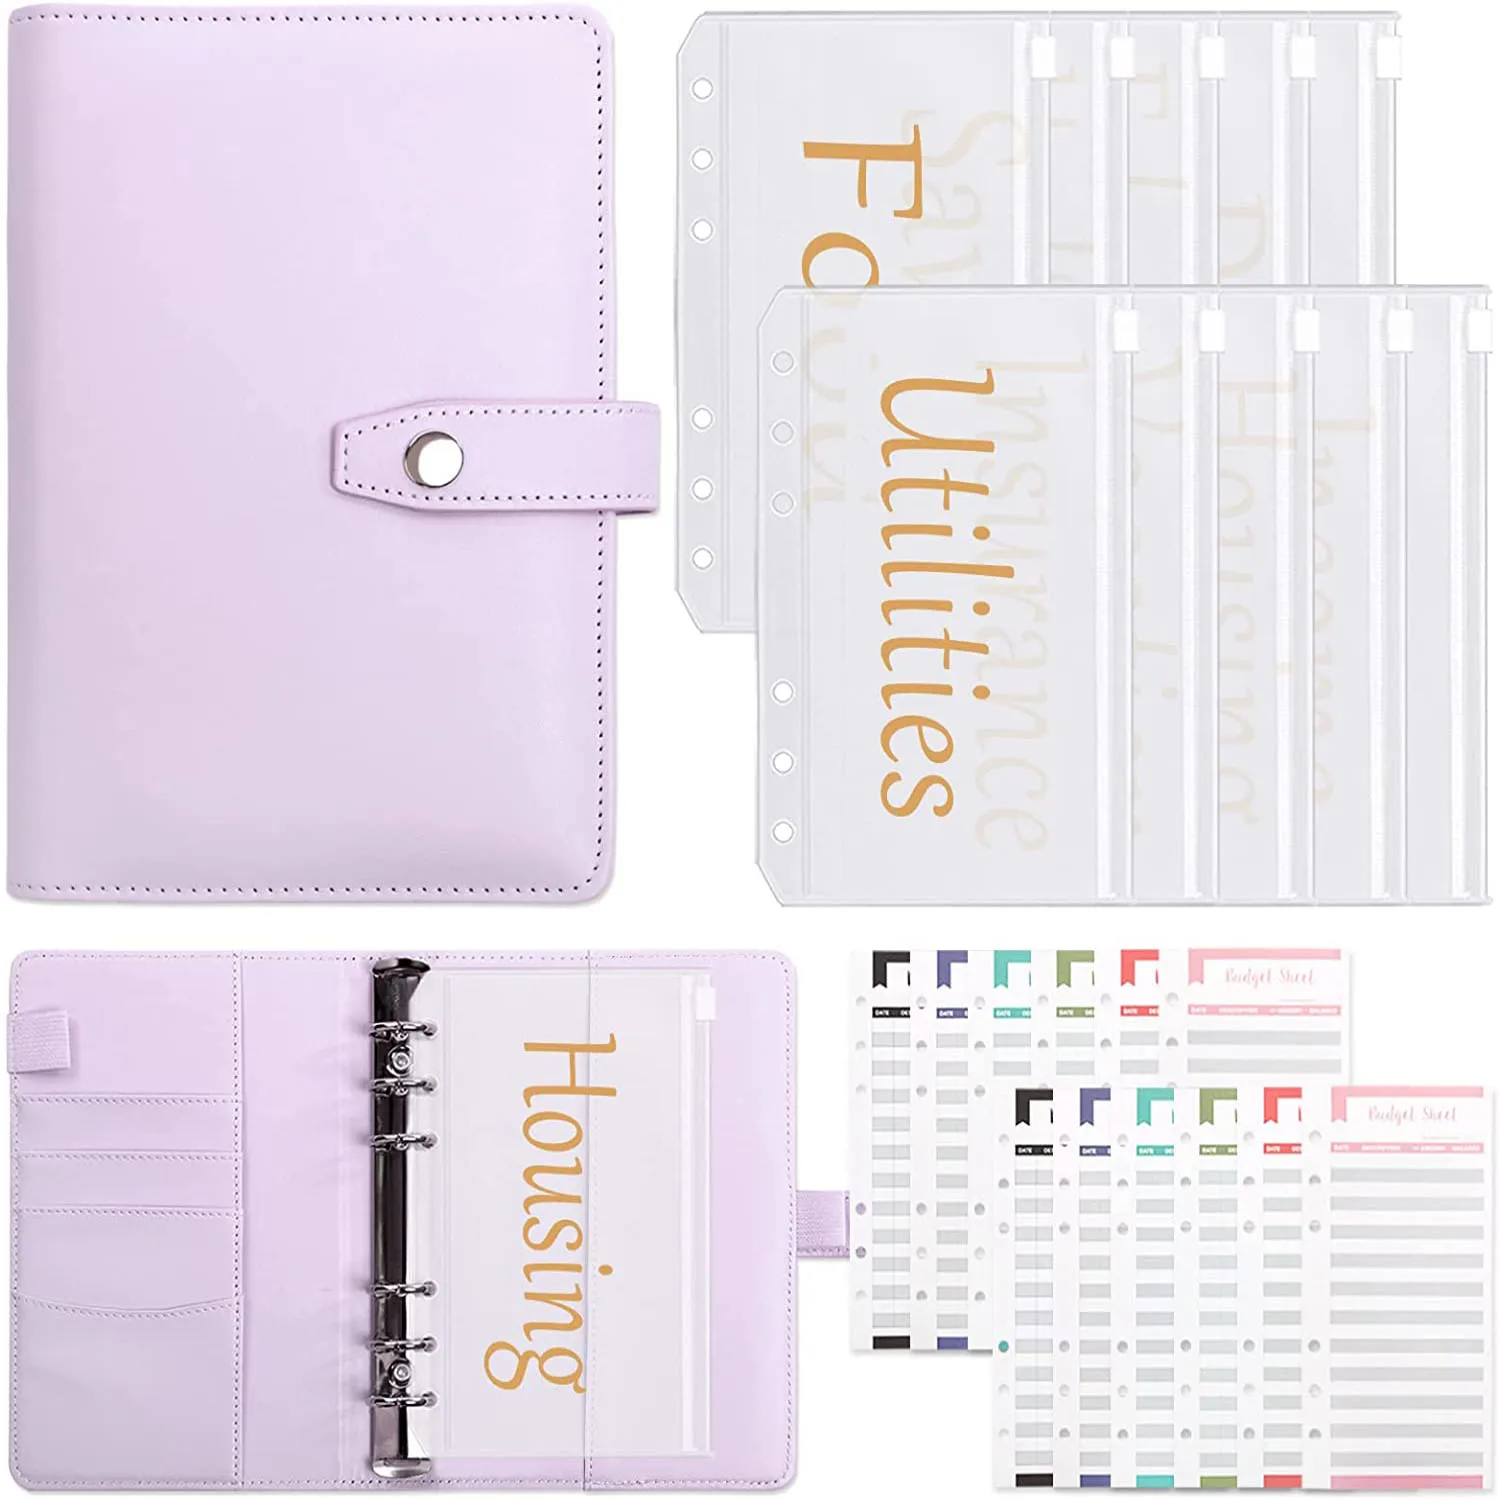 A6 Budget Binder with 10pcs Pre-printed Cash Envelopes for Budgeting,12 Expense Budget Sheets,Planner Organizer for Saving Money a6 pu leather budget binder cash envelopes planner organizer system with expense tracker budget sheets labels for saving money